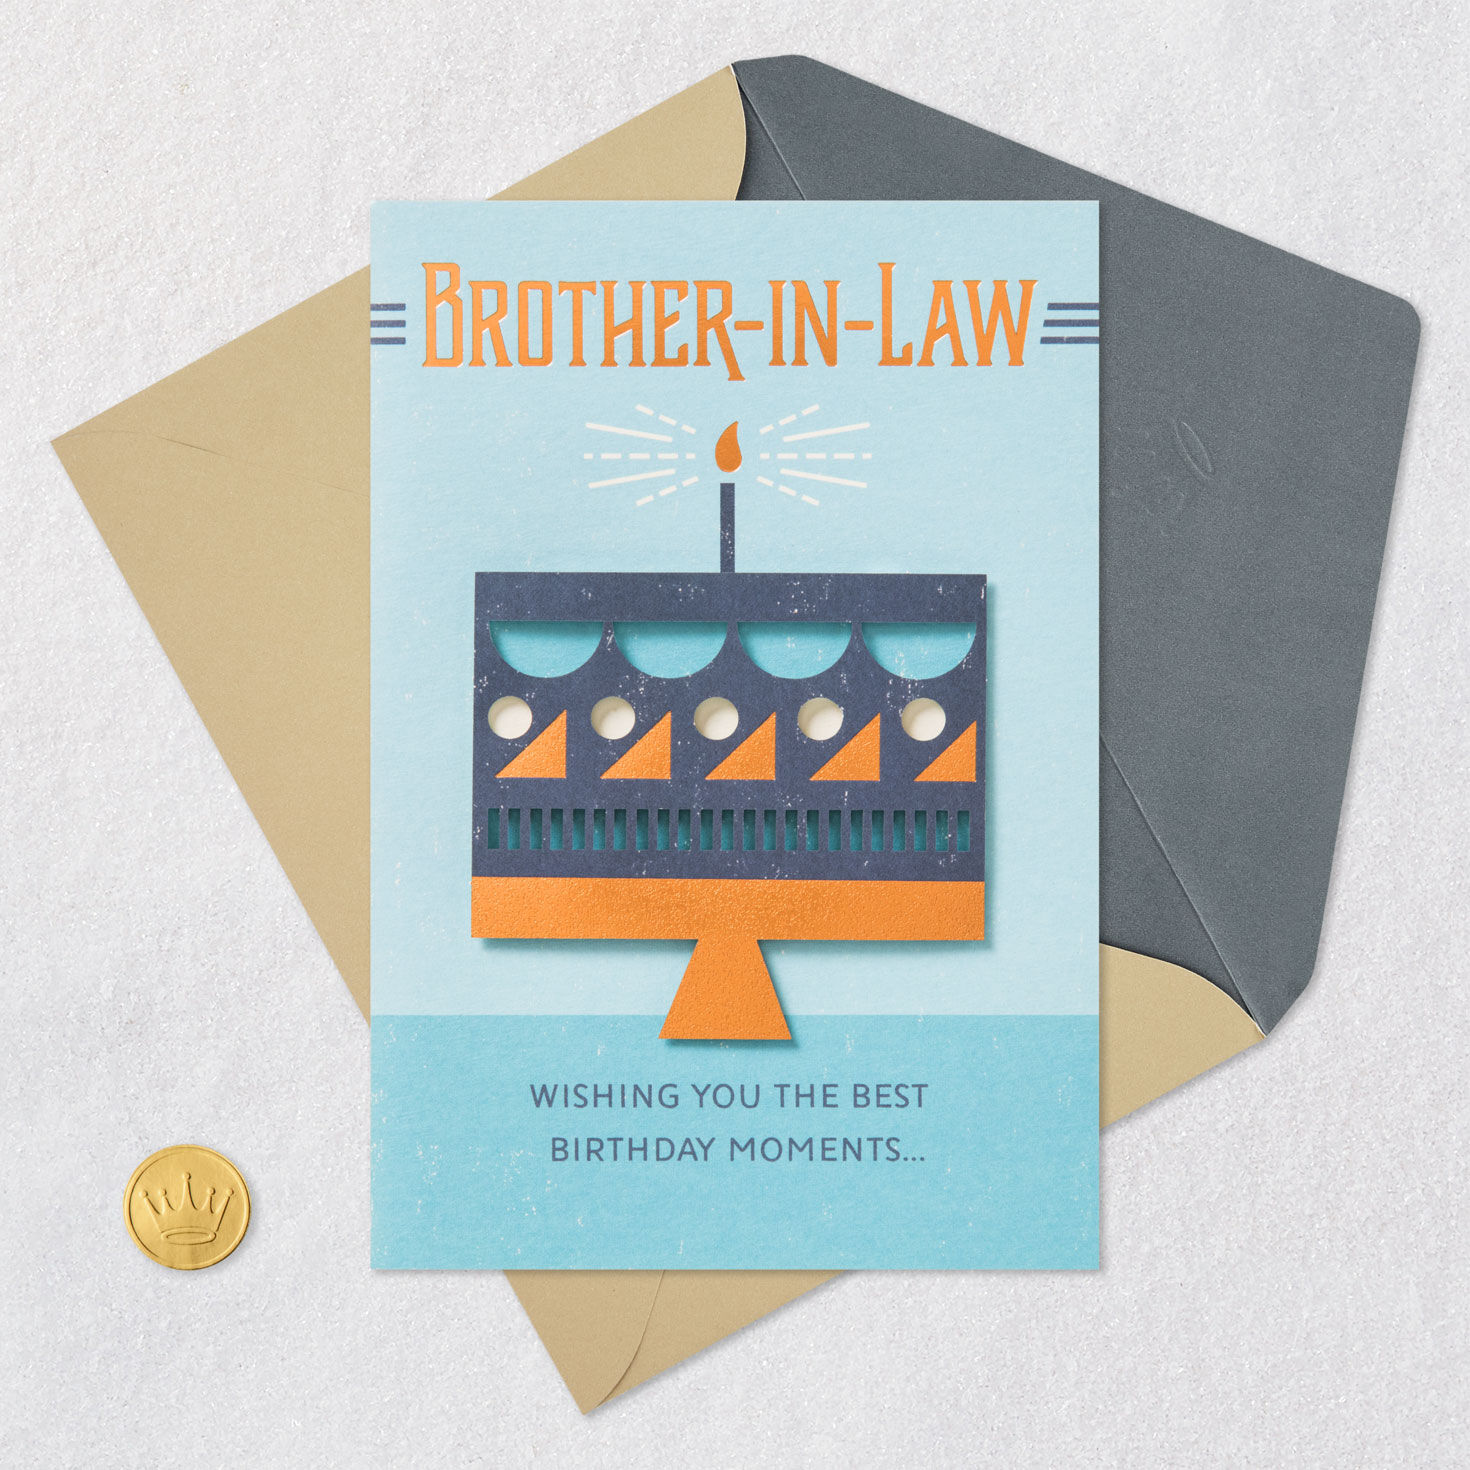 Wishing You the Best Moments Birthday Card for Brother-in-Law for only USD 6.59 | Hallmark